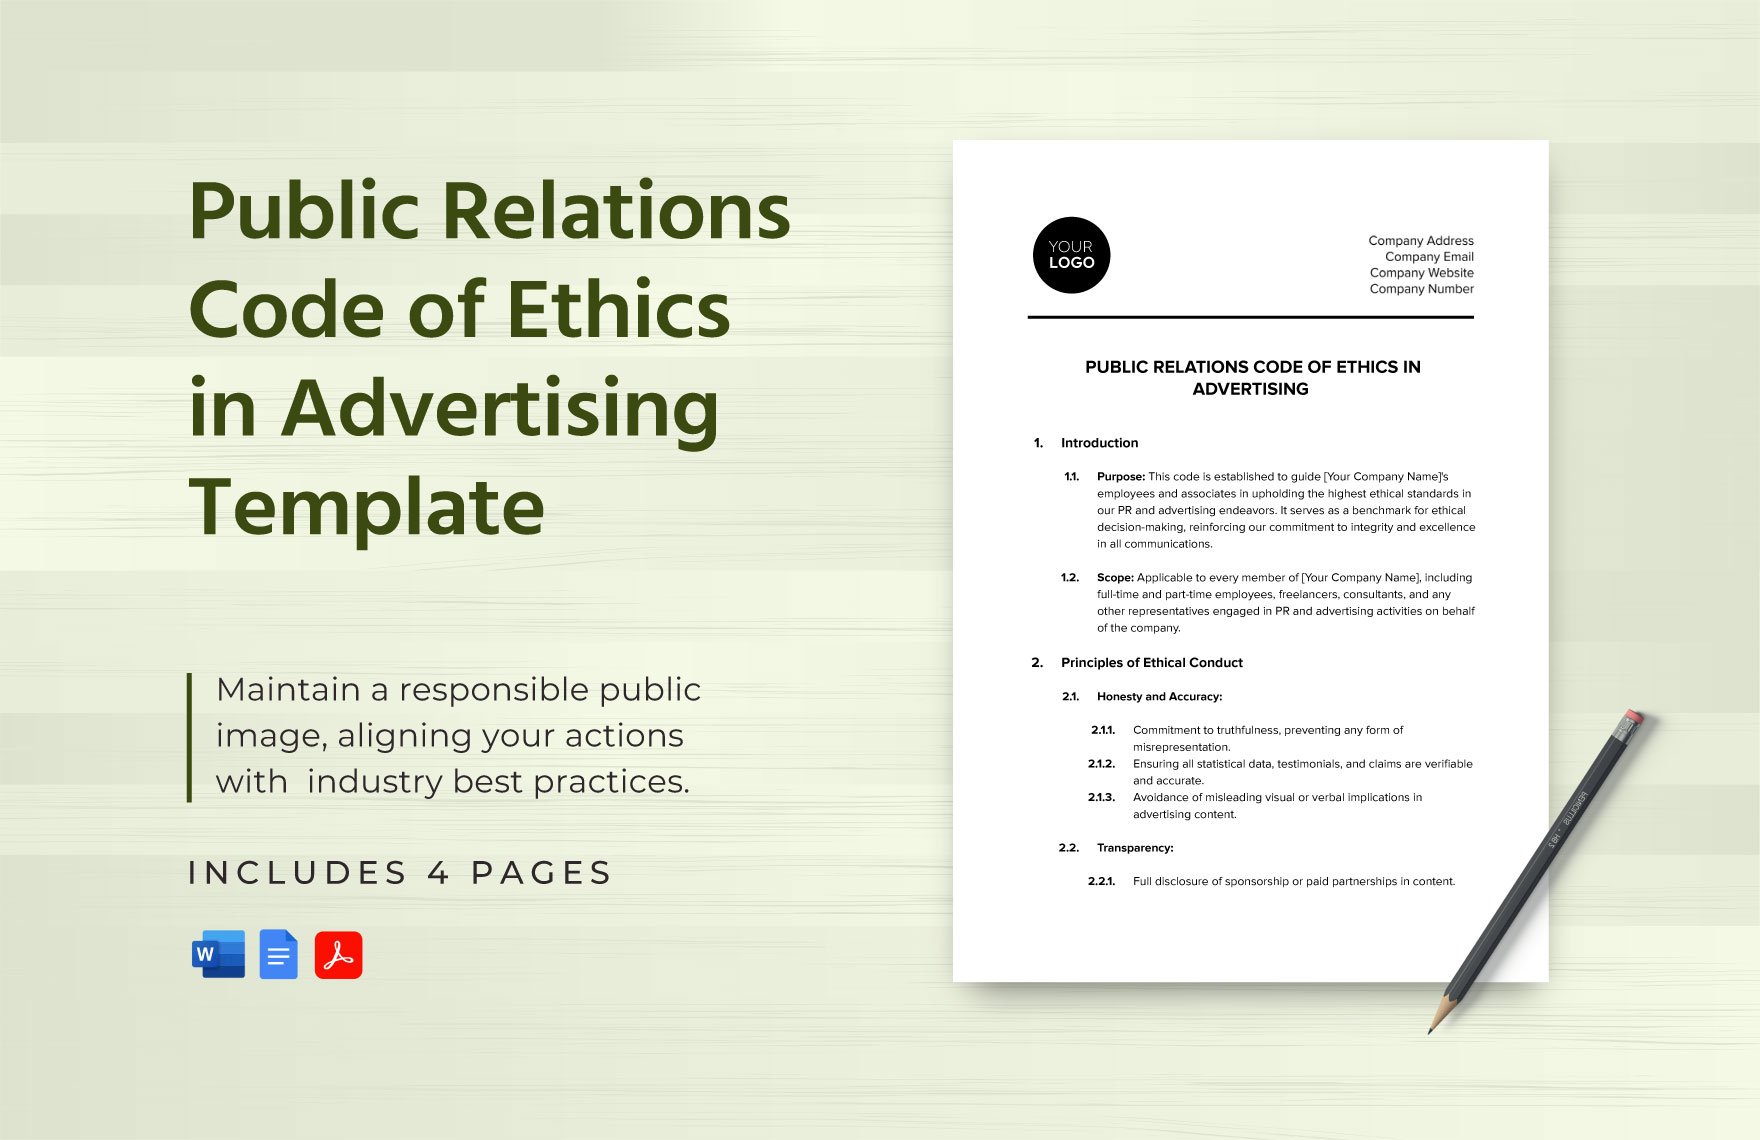 Public Relations Code of Ethics in Advertising Template in Word, Google Docs, PDF